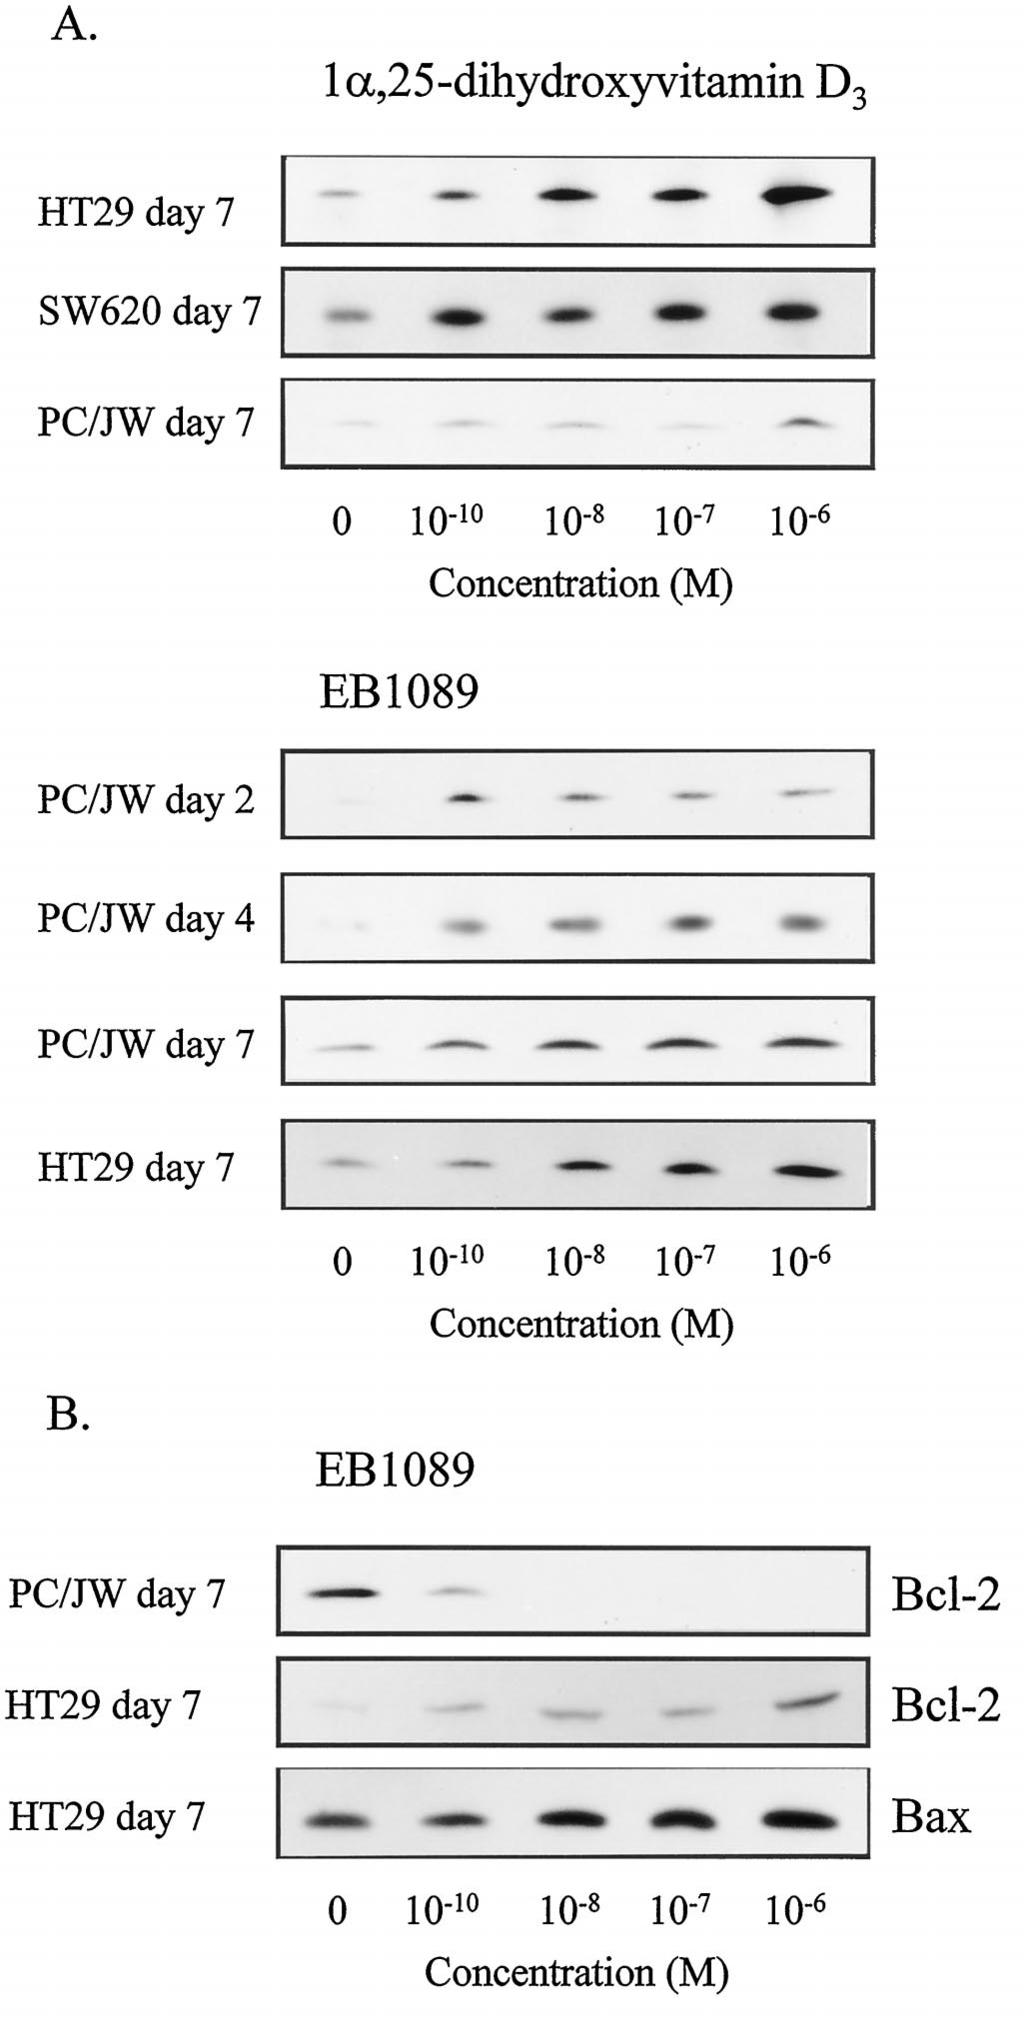 loading was confirmed by reprobing for -tubulin. The effects of the top concentration of 1,25-dihydroxyvitamin D 3 and EB1089 are summarized in Tables 1 and 2, respectively.